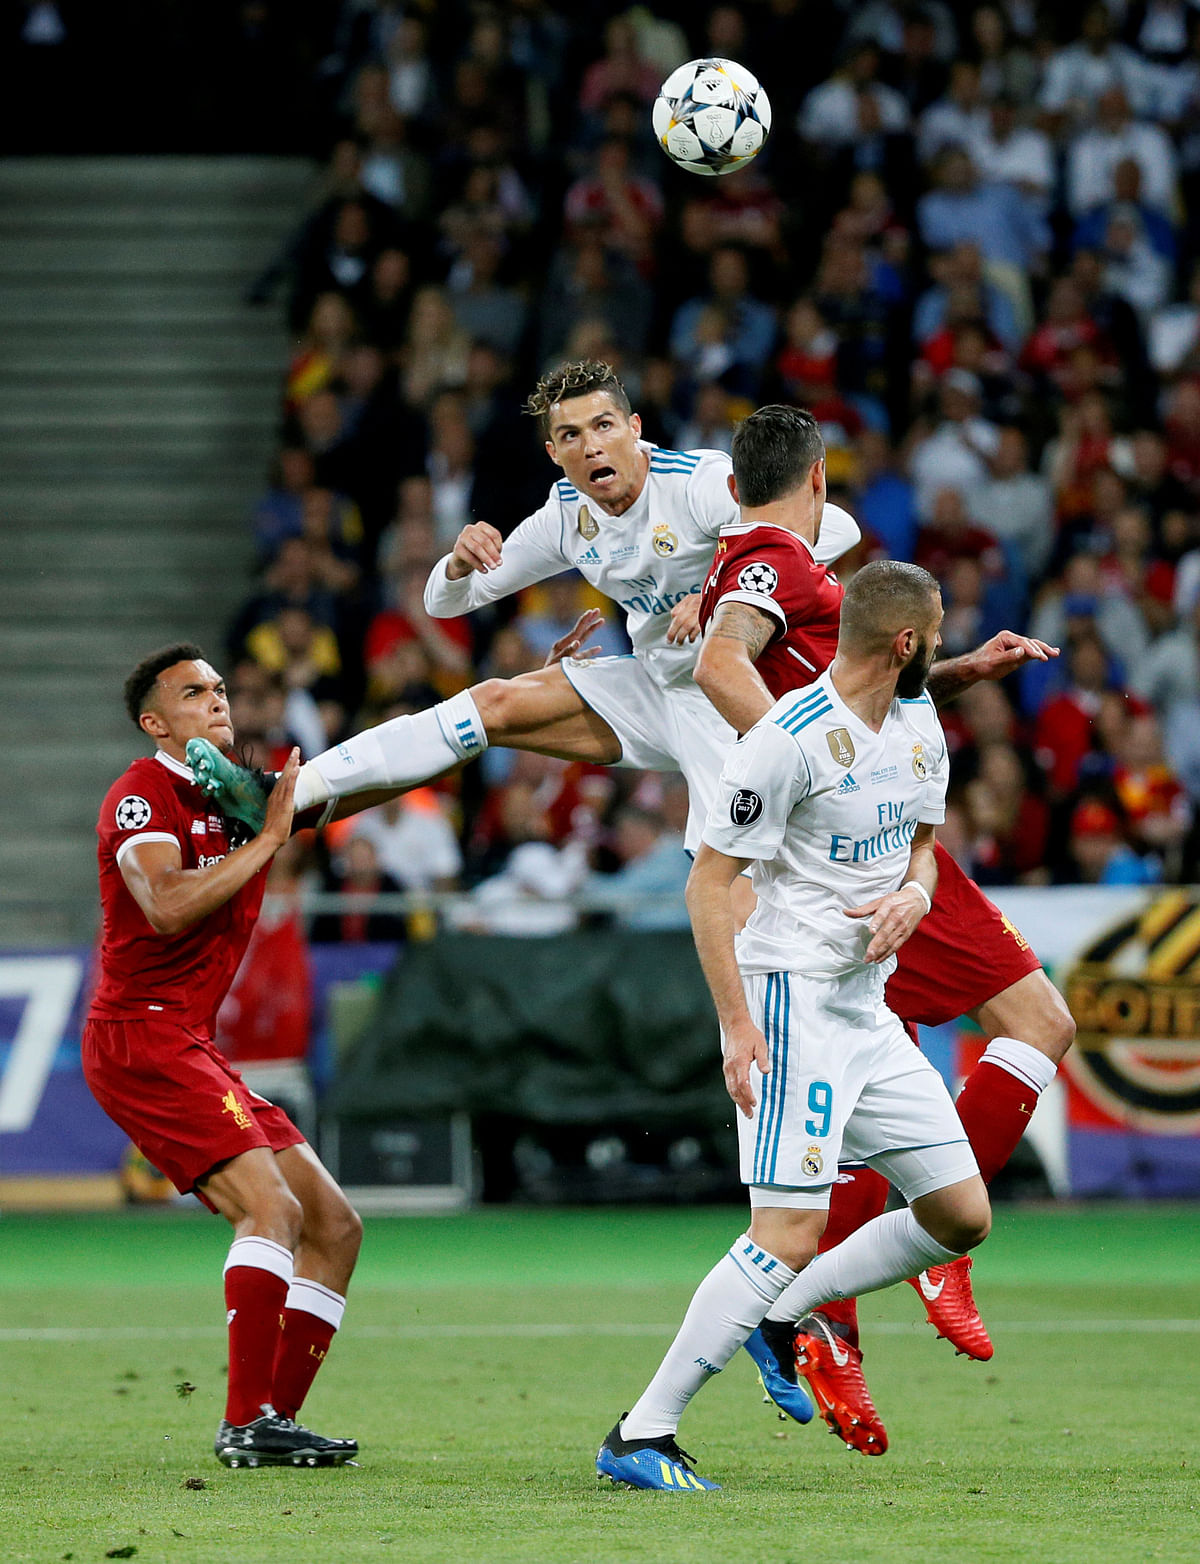 Real Madrid`s Cristiano Ronaldo heads at goal before Karim Benzema scored a goal from the rebound which was subsequently disallowed for offside. Photo: Reuters